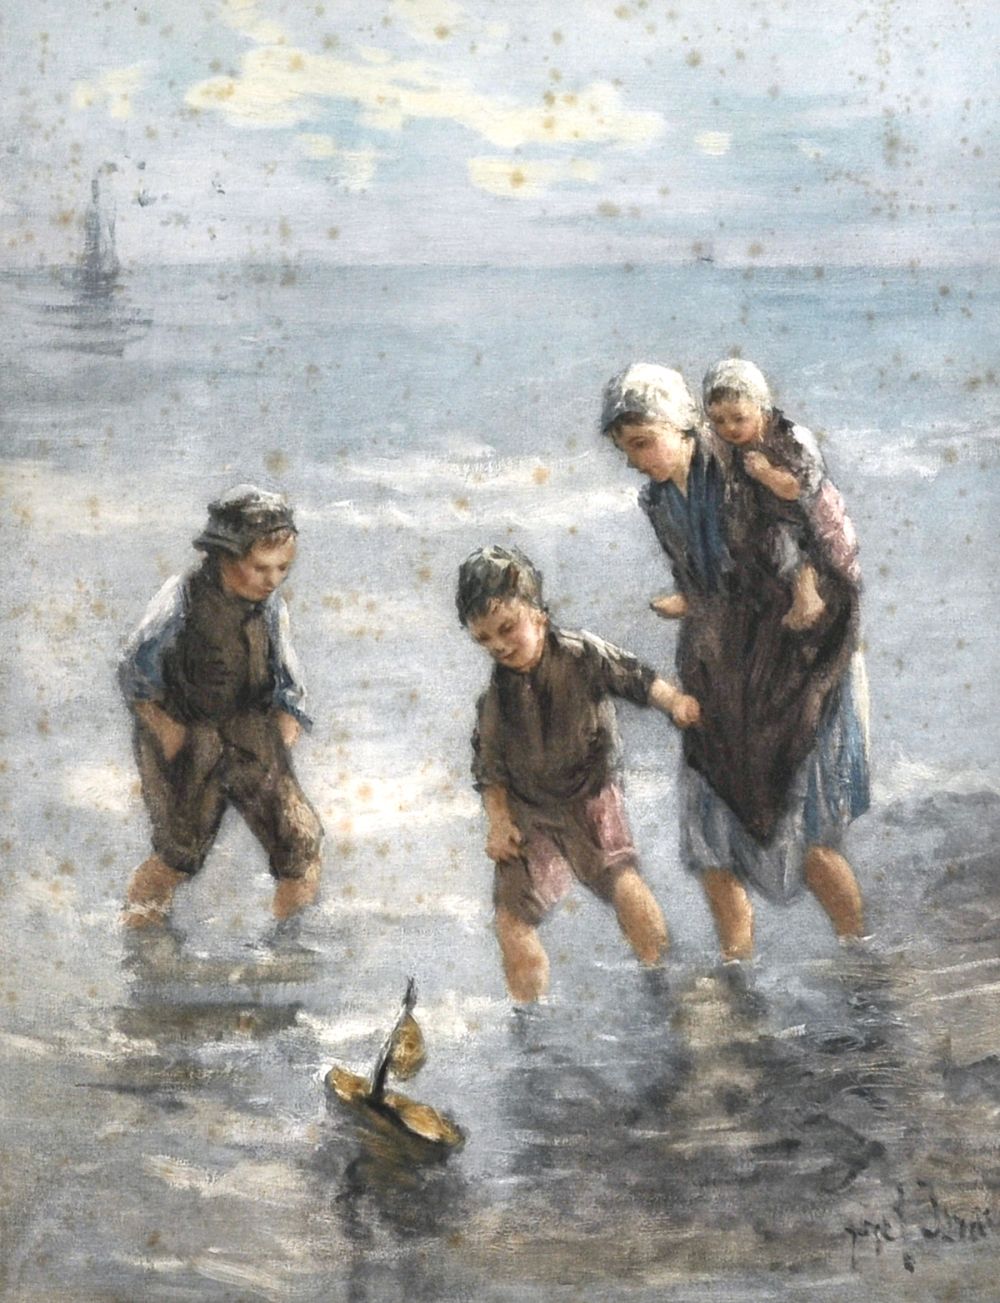 After Jozef Israels (1824-1911) Dutch. "Children of the Sea", Print, Inscribed on a label on the